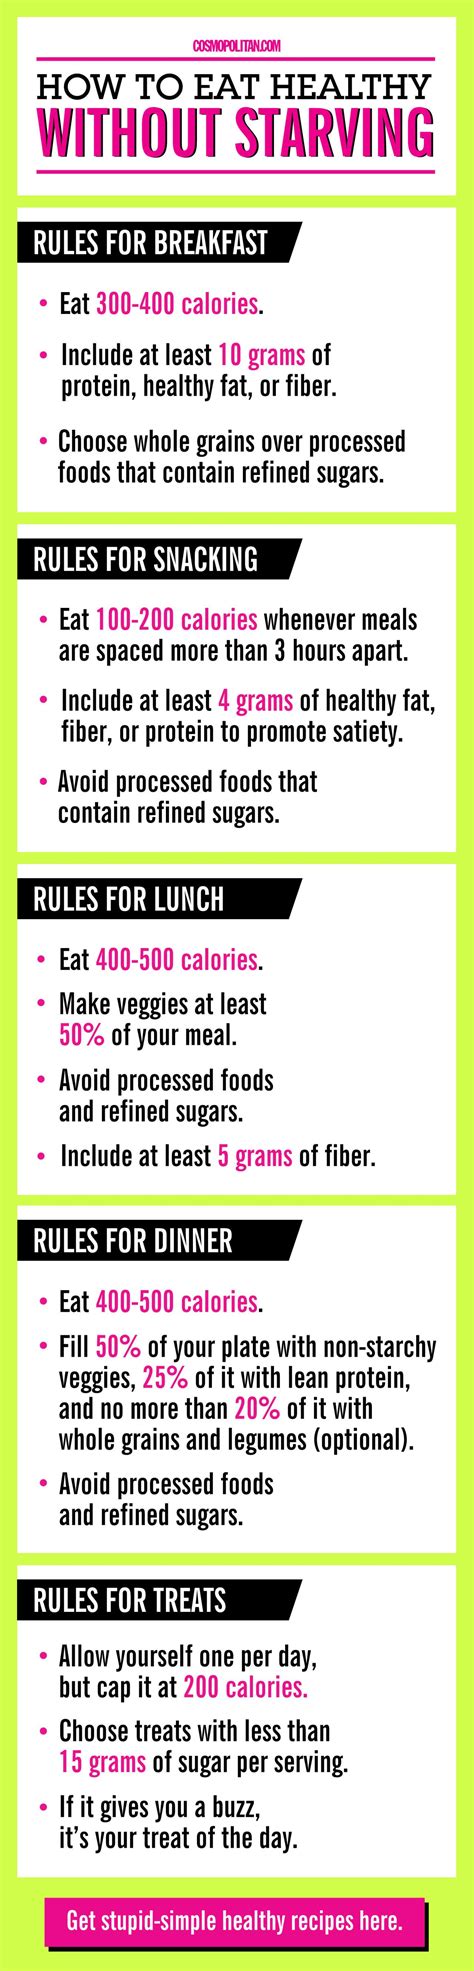 Health And Fitness 16 Healthy Eating Rules You Should Always Follow